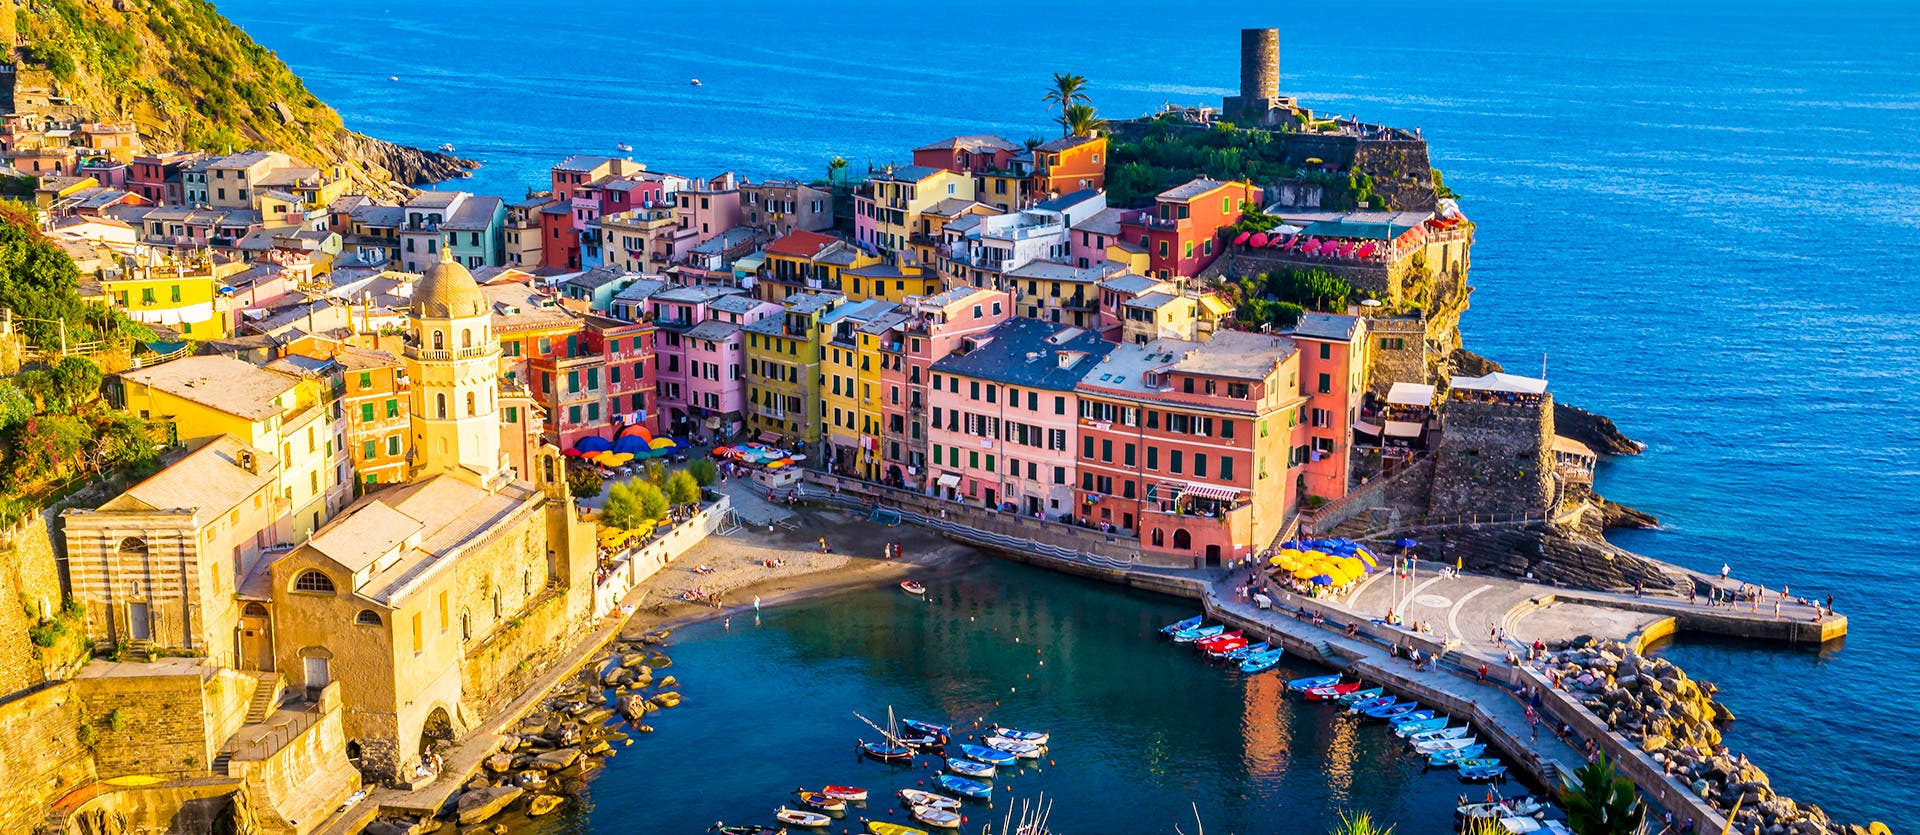 What to see in Italy Cinque Terre